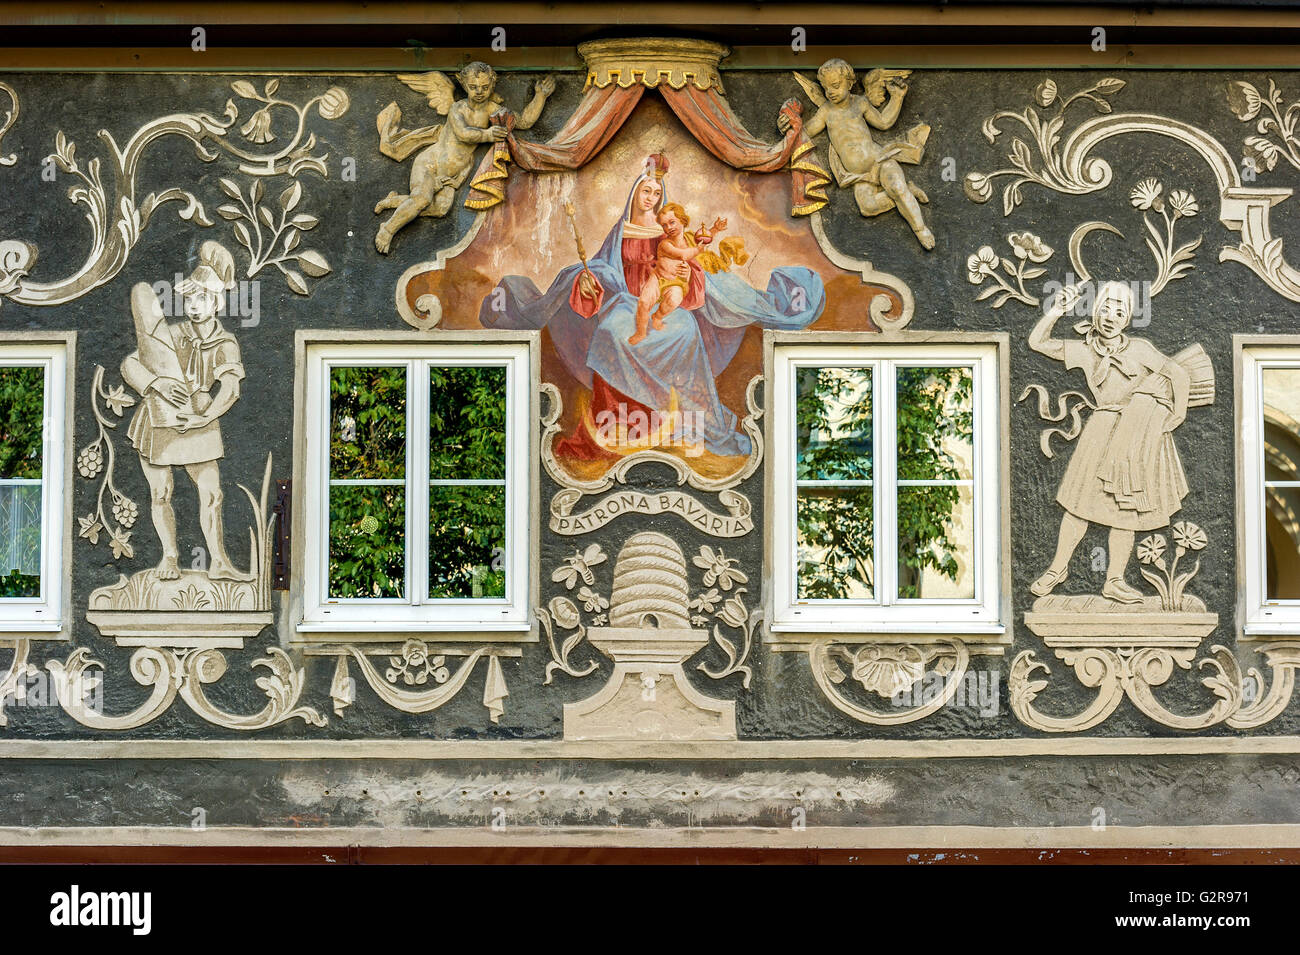 Former Pastry with mural painting of the Patrona Bavaria, stucco angels, man with Sugarloaf, Beehive, woman with cereals Stock Photo